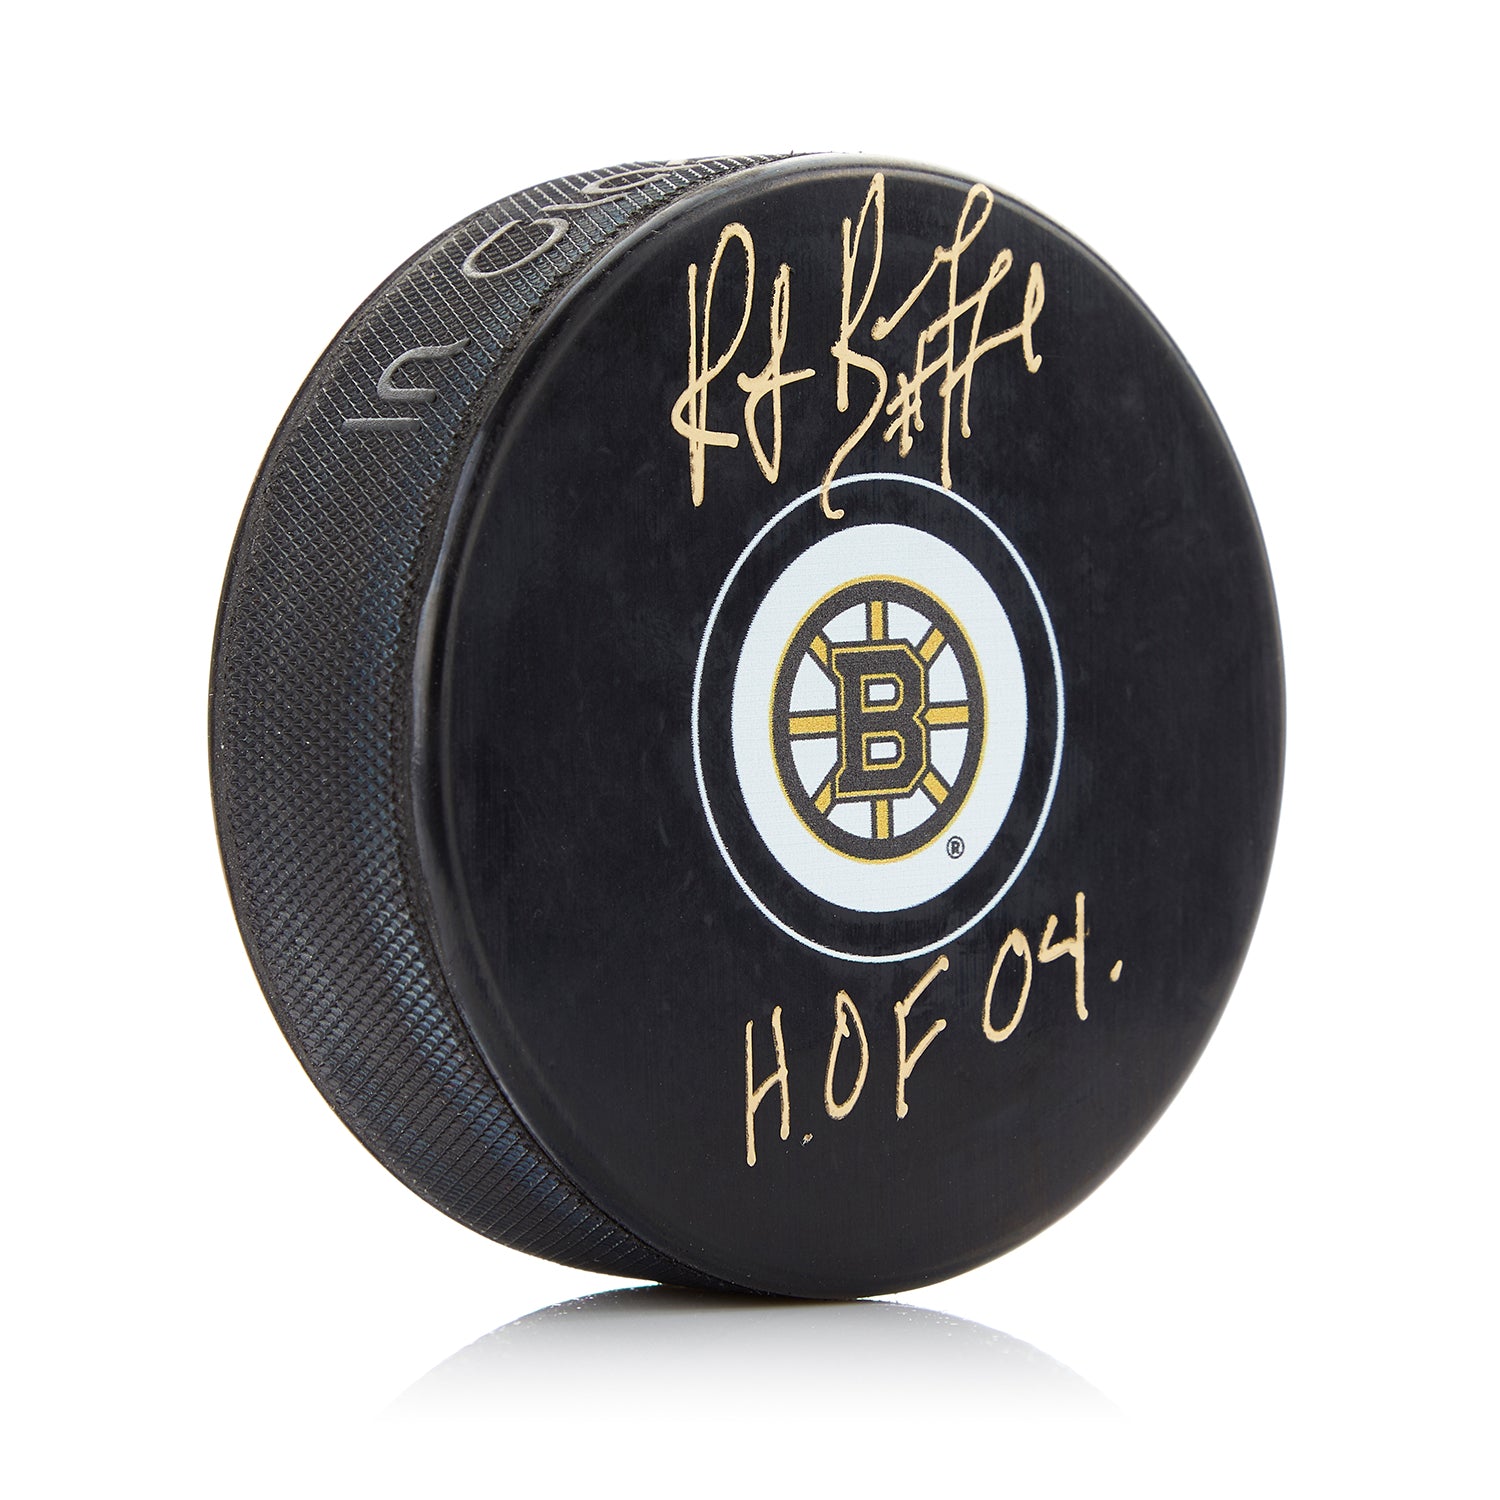 Ray Bourque Signed Boston Bruins Hockey Puck with HOF Note